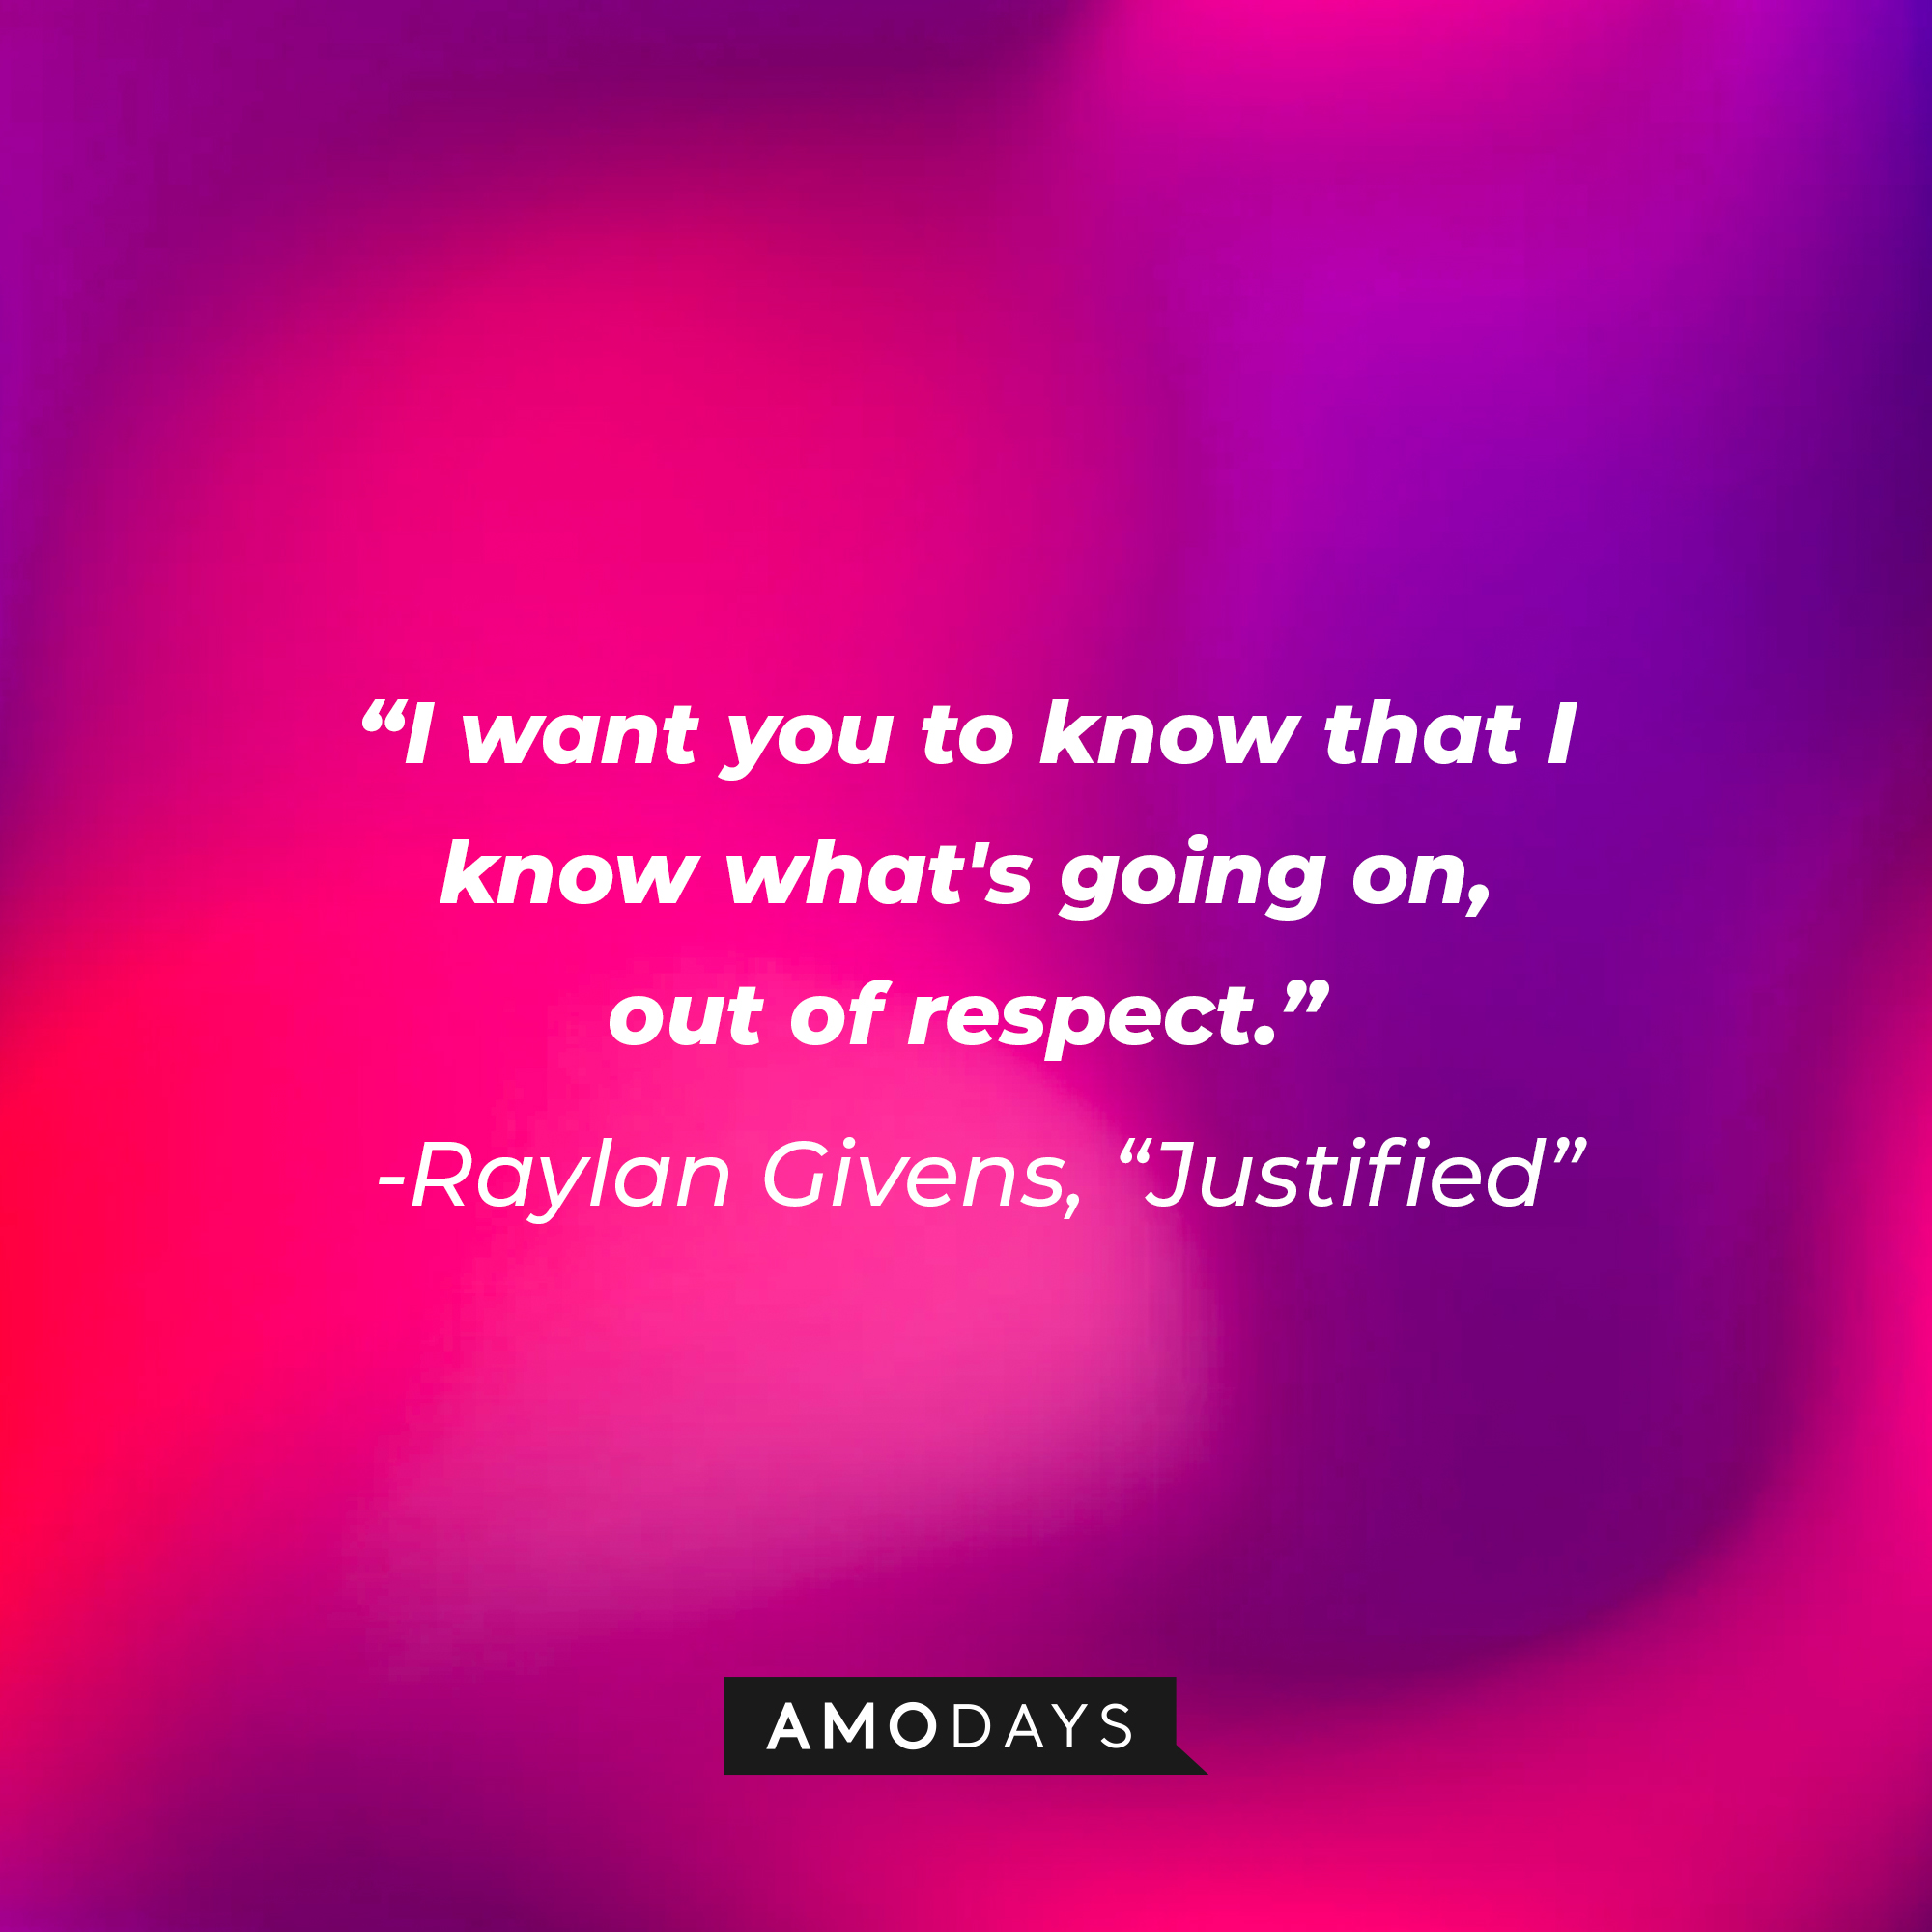 Raylan Givens’ quote from “Justified”: “I want you to know that I know what's going on, out of respect.” | Source: AmoDays